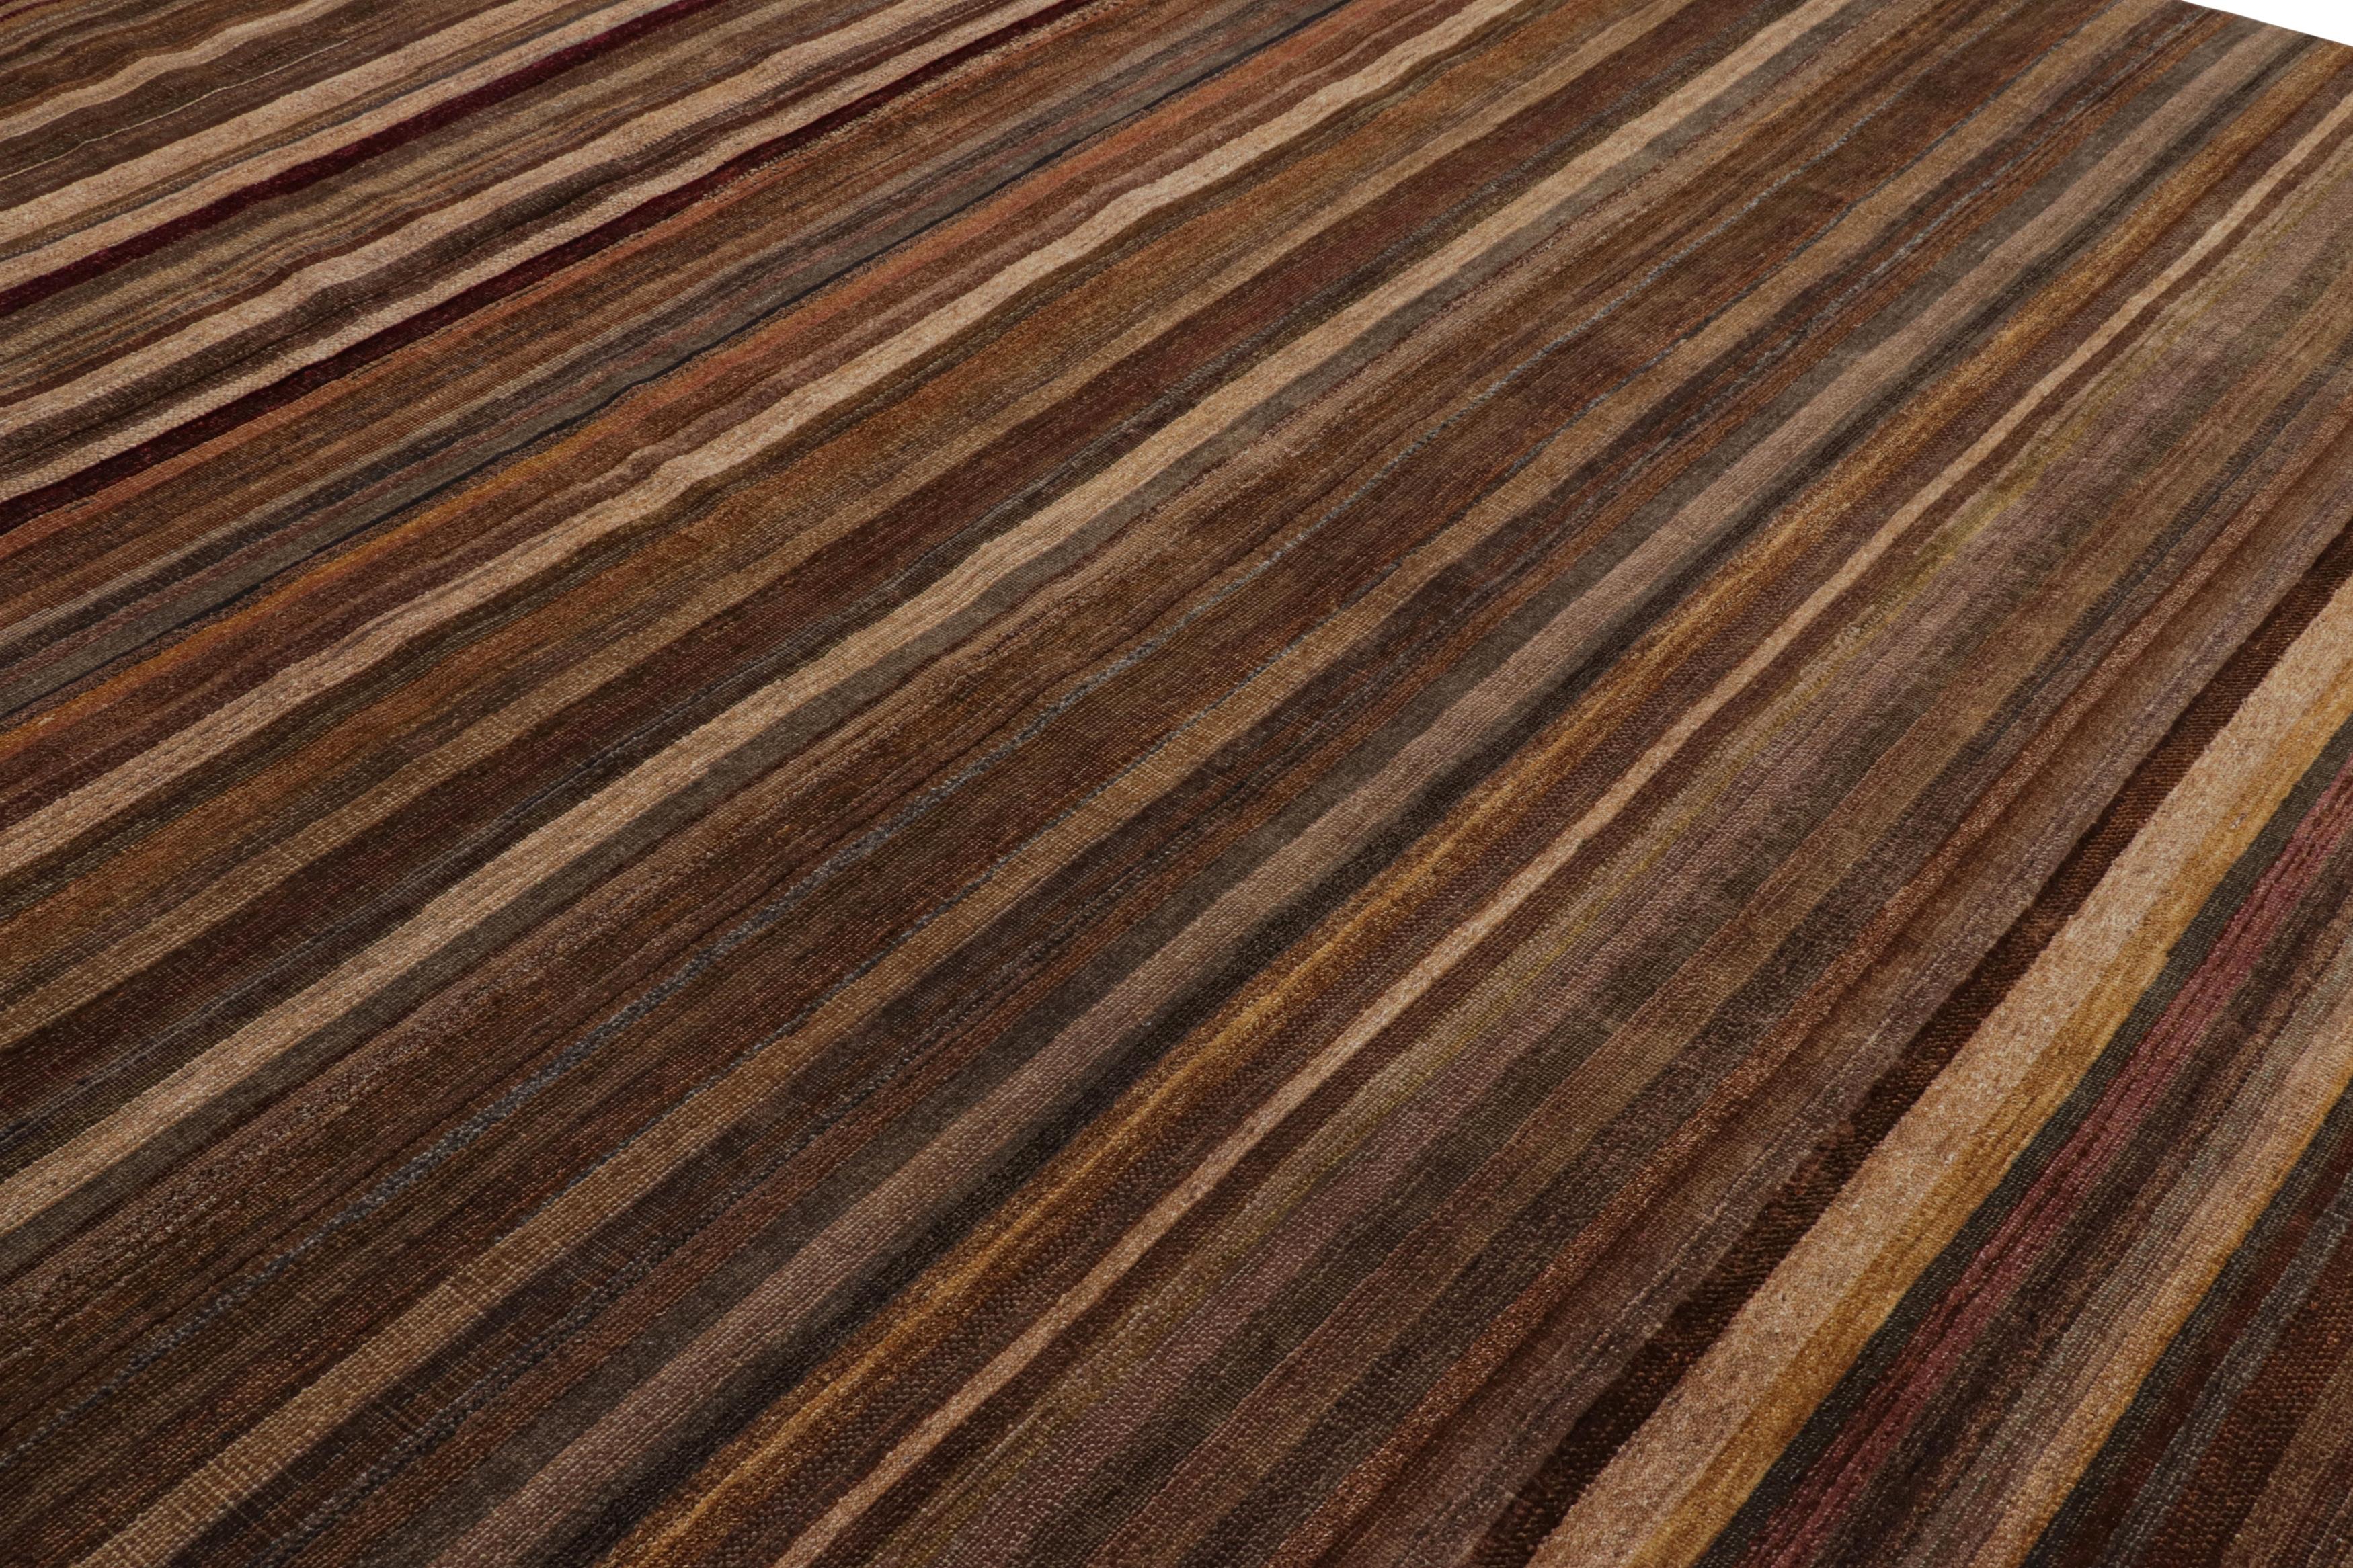 Indian Rug & Kilim’s Modern Textural Rug in Rich Brown Stripes and Umber Tones For Sale